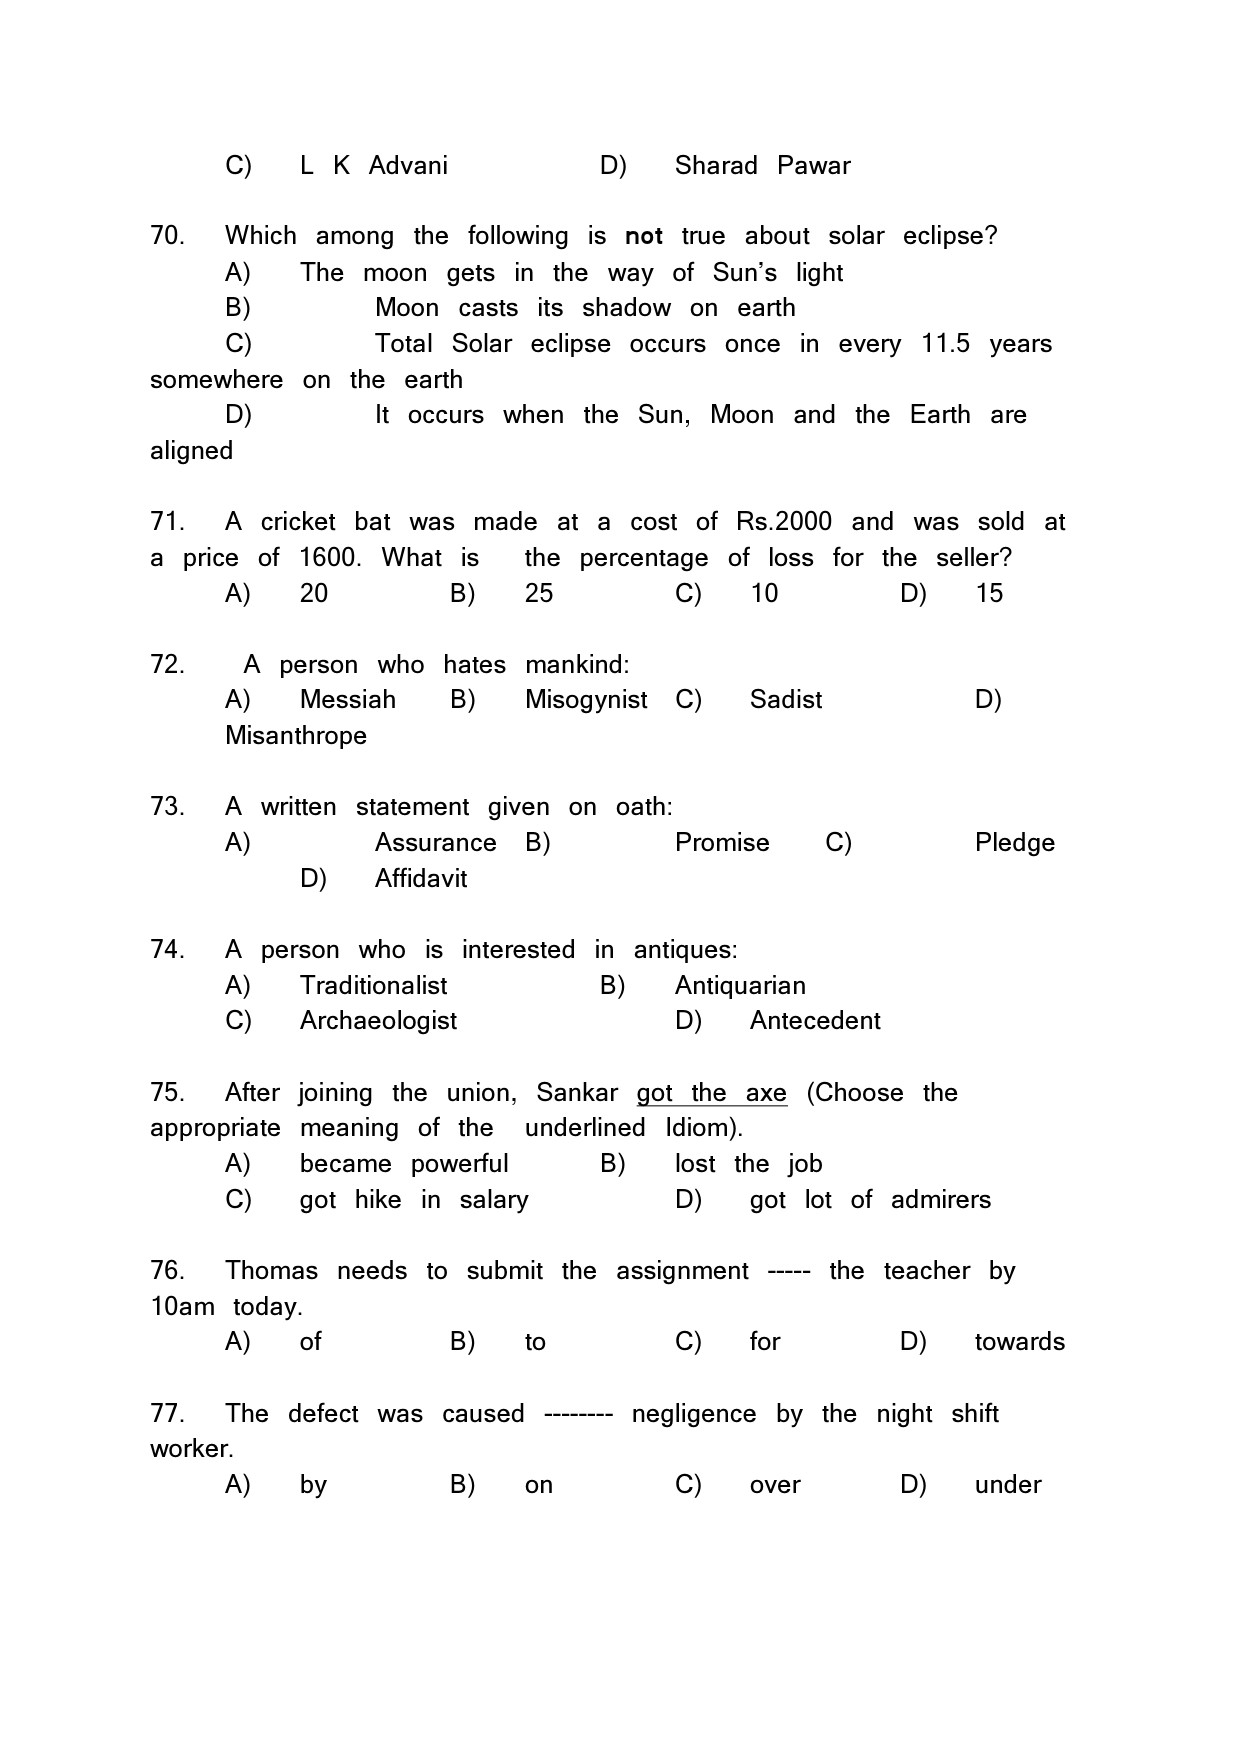 Kerala SET General Knowledge Exam Question Paper February 2020 11